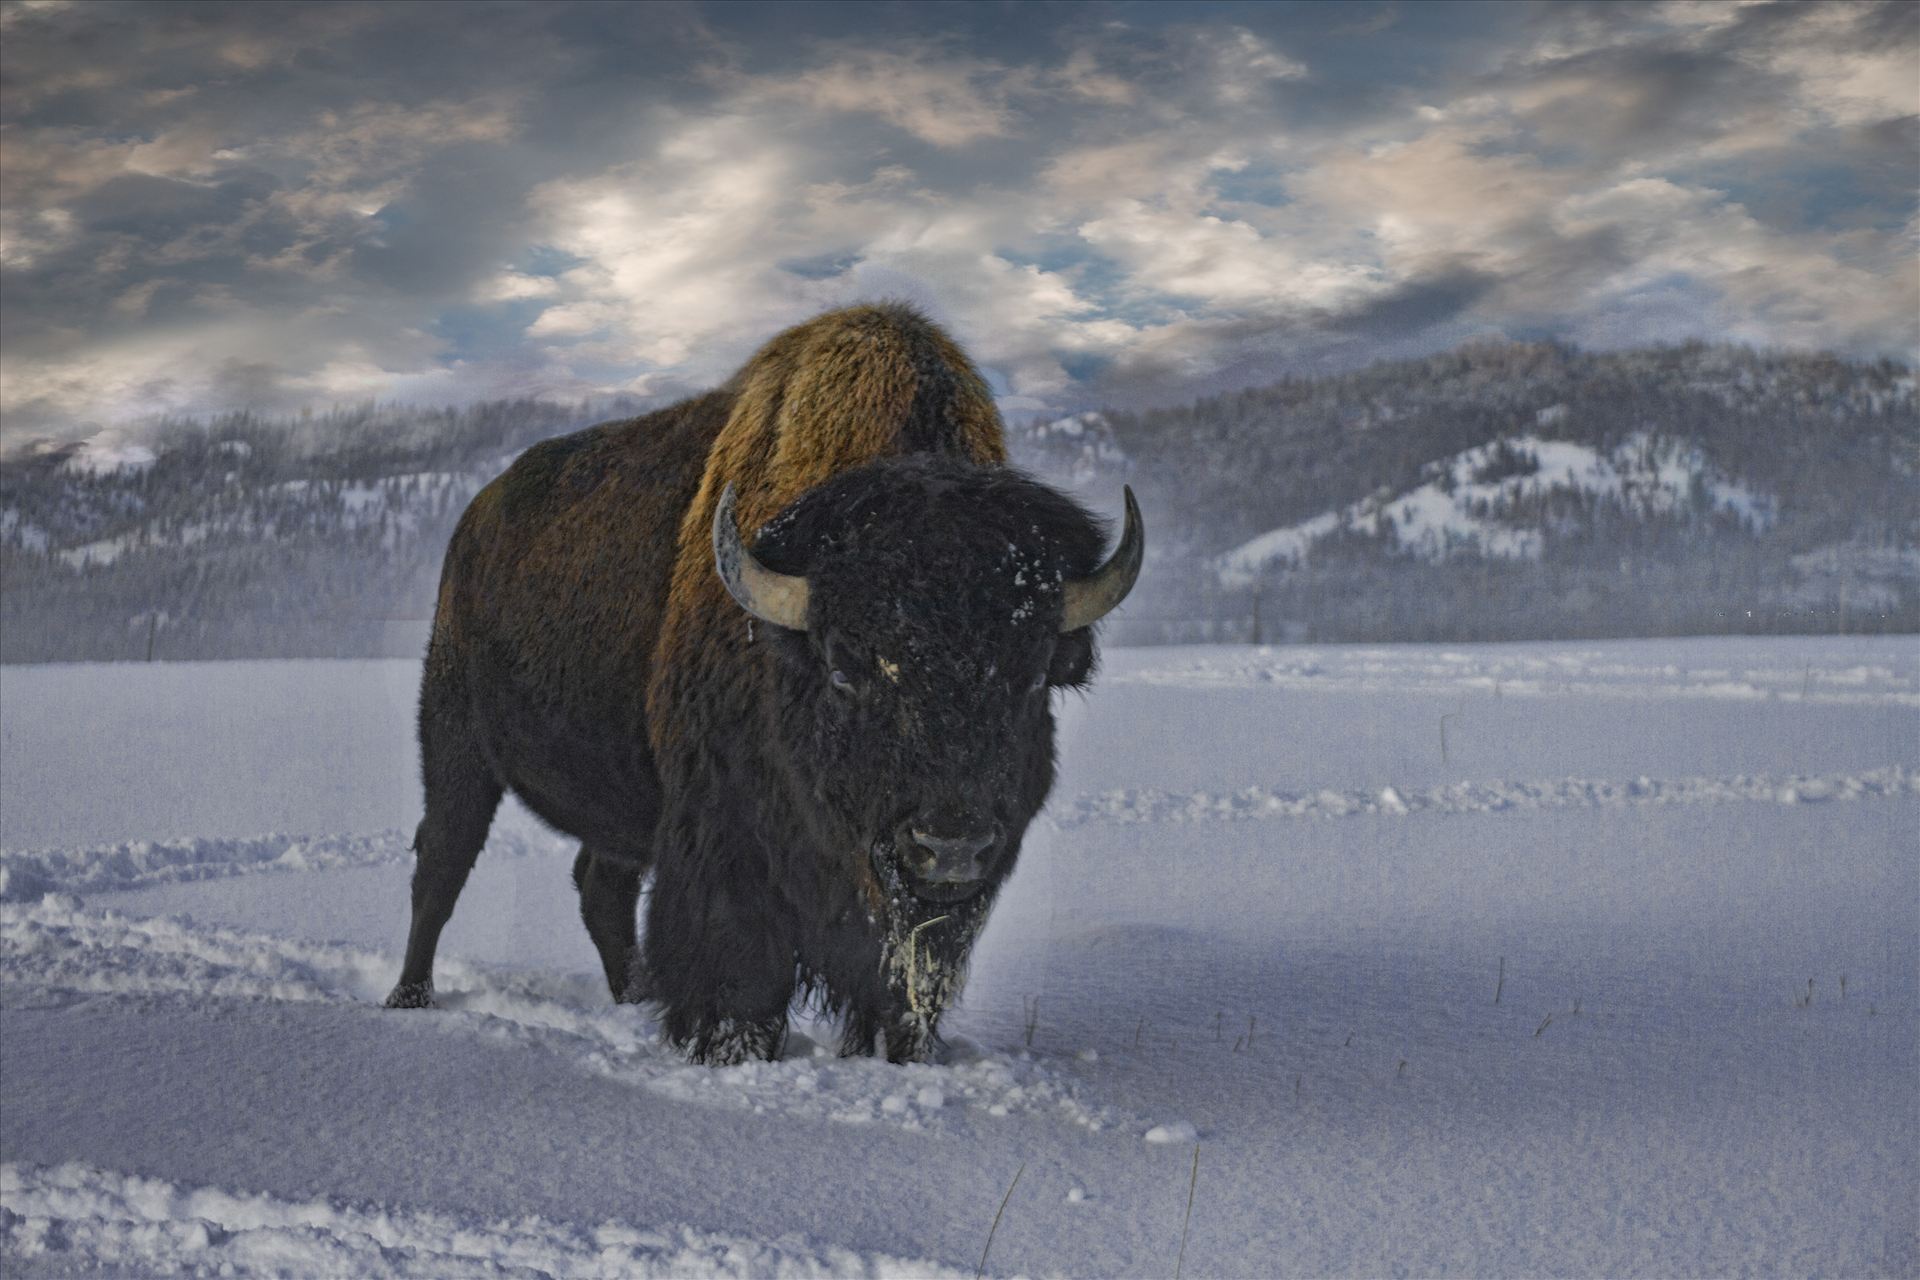 Bull Buffalo in Snow - What a rush this was, being 30 ft. from a 2500 lb. bull buffalo.  by Bear Conceptions Photography